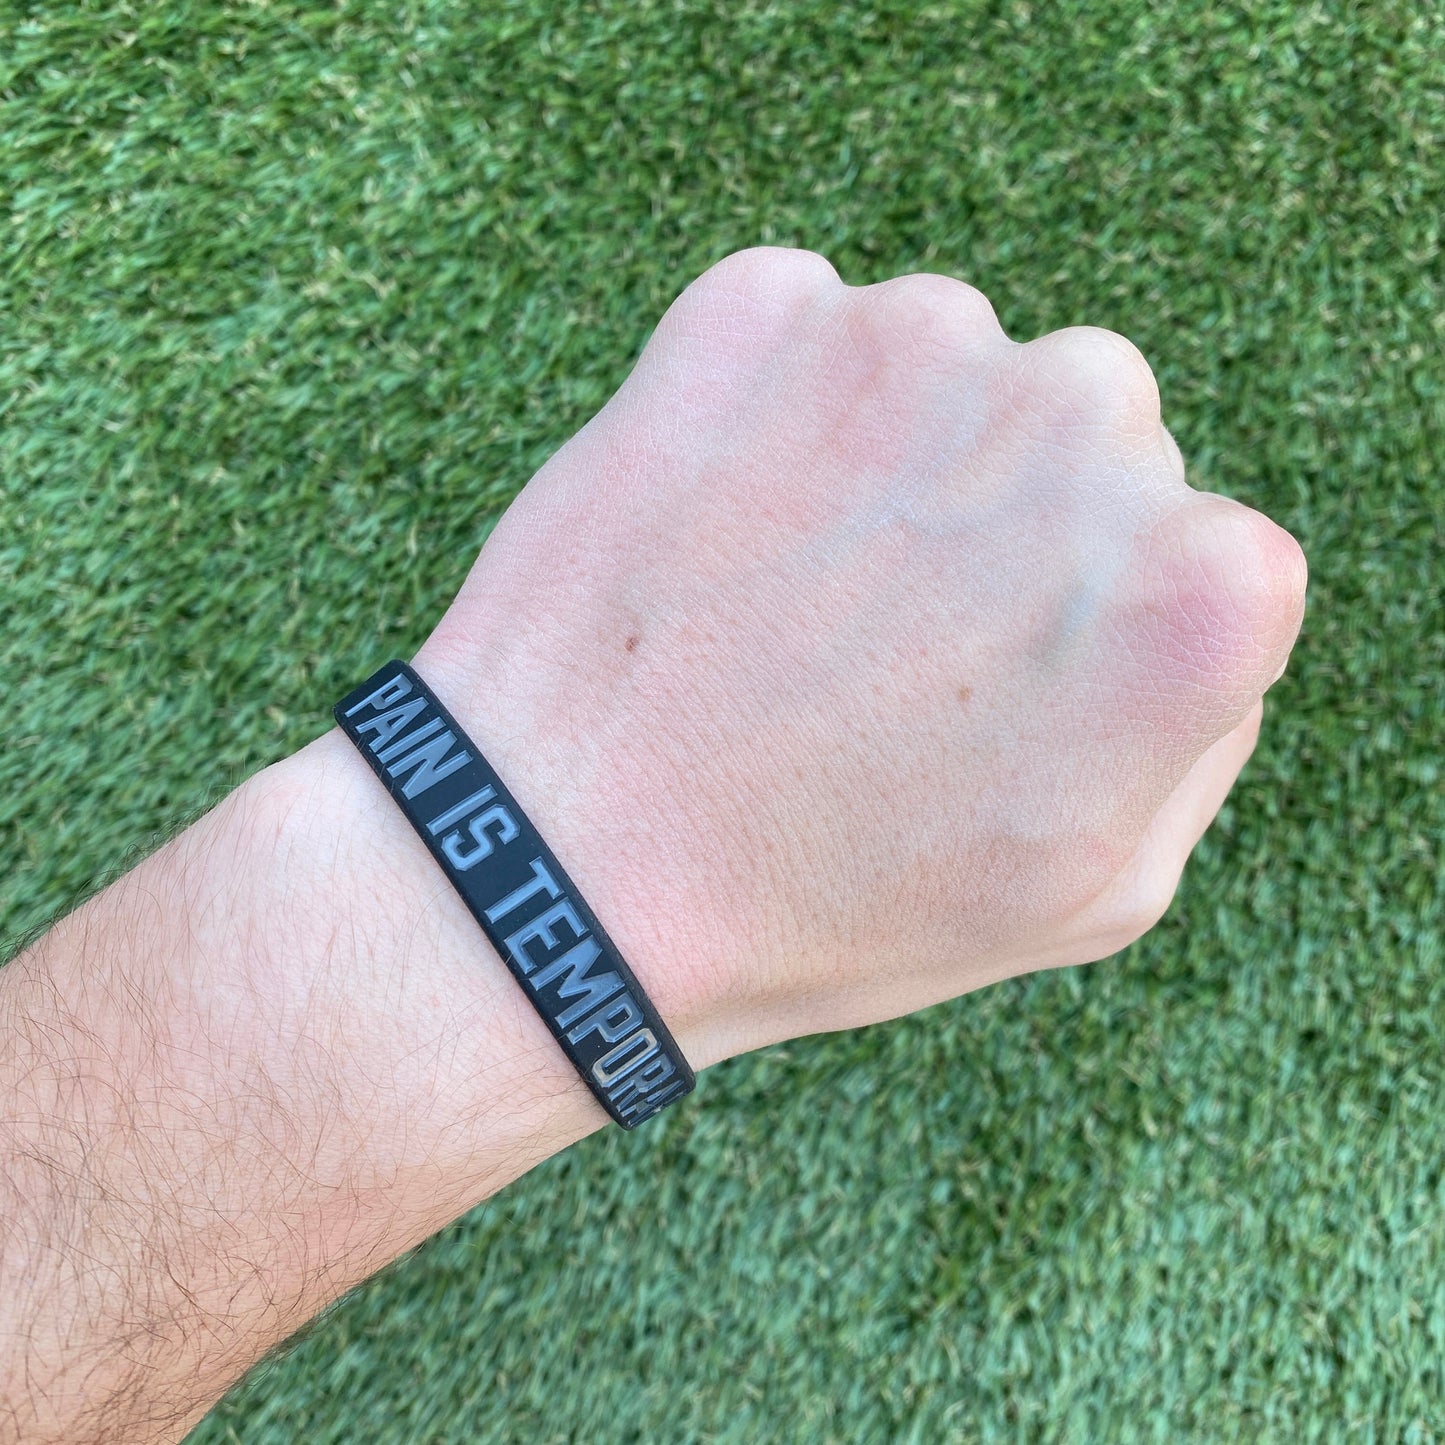 PAIN IS TEMPORARY Wristband - Southern Grace Creations